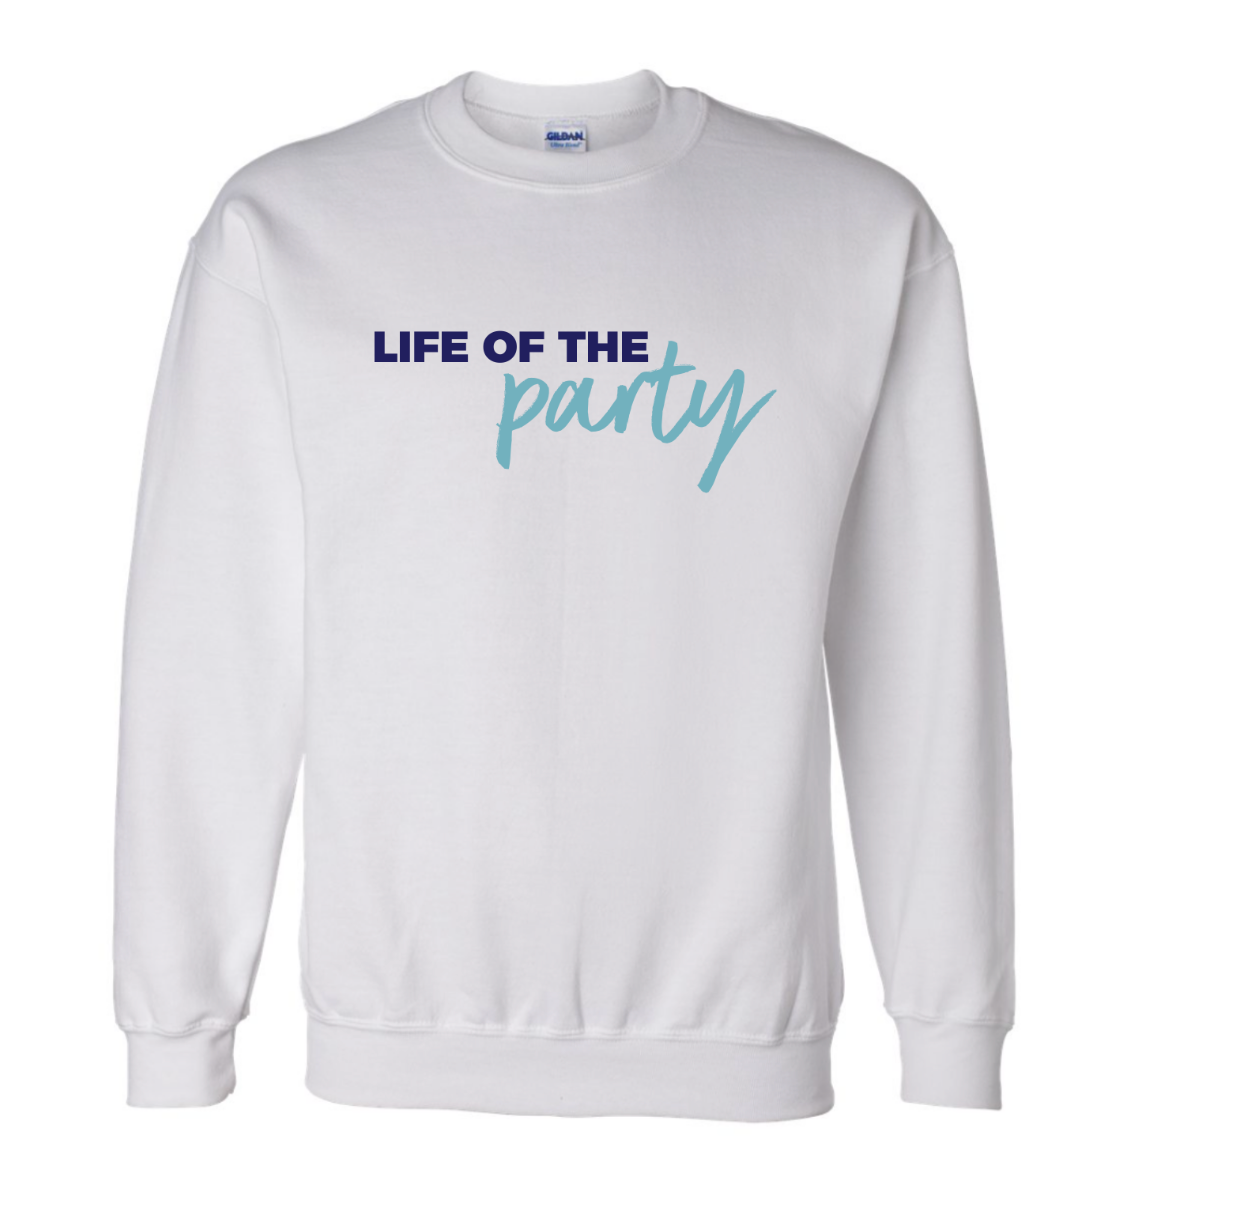 LIFE OF THE PARTY white sweatshirt